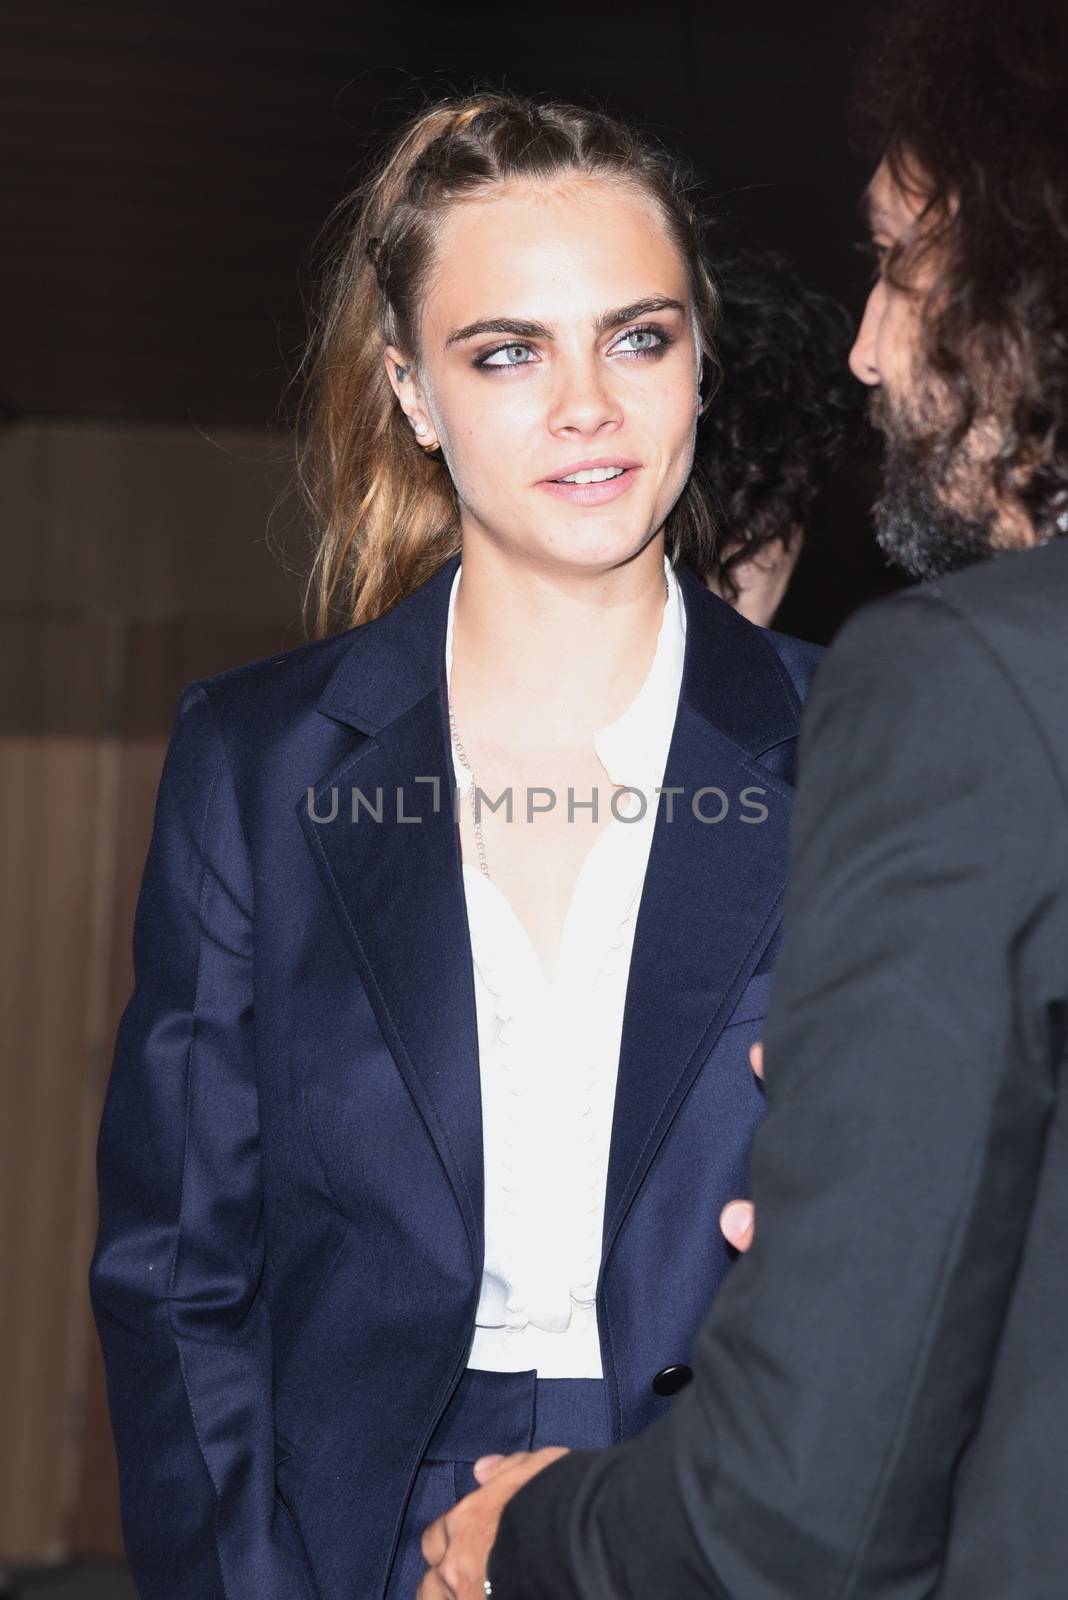 UK, London: Cara Delevigne and a host of models and celebrities attend the Louis Vuitton Series 3 opening night gala in The Strand, London on September 20, 2015. 